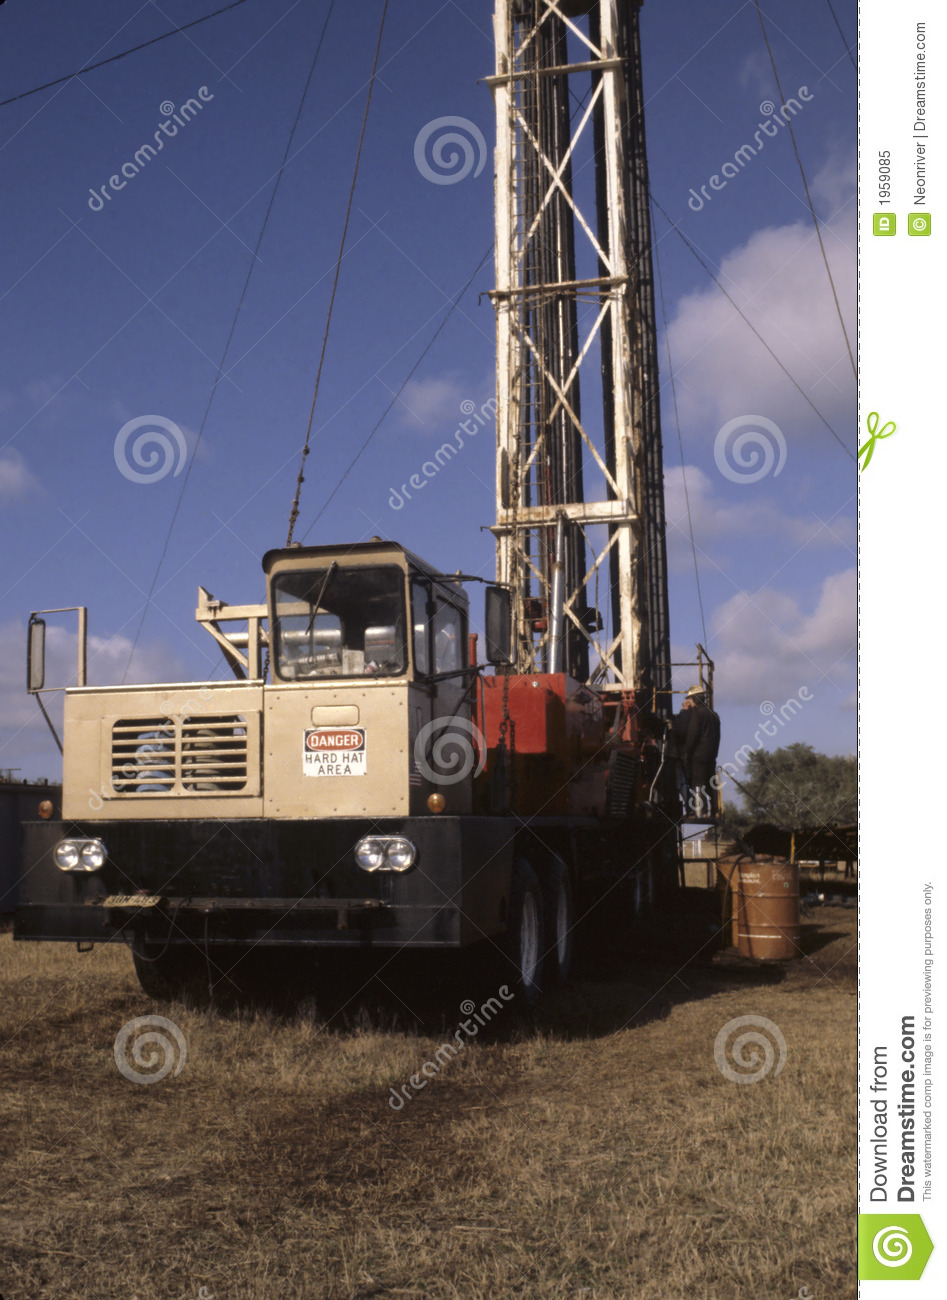 Workover Rig Used To Maintain And Repair Broken Oil Wells